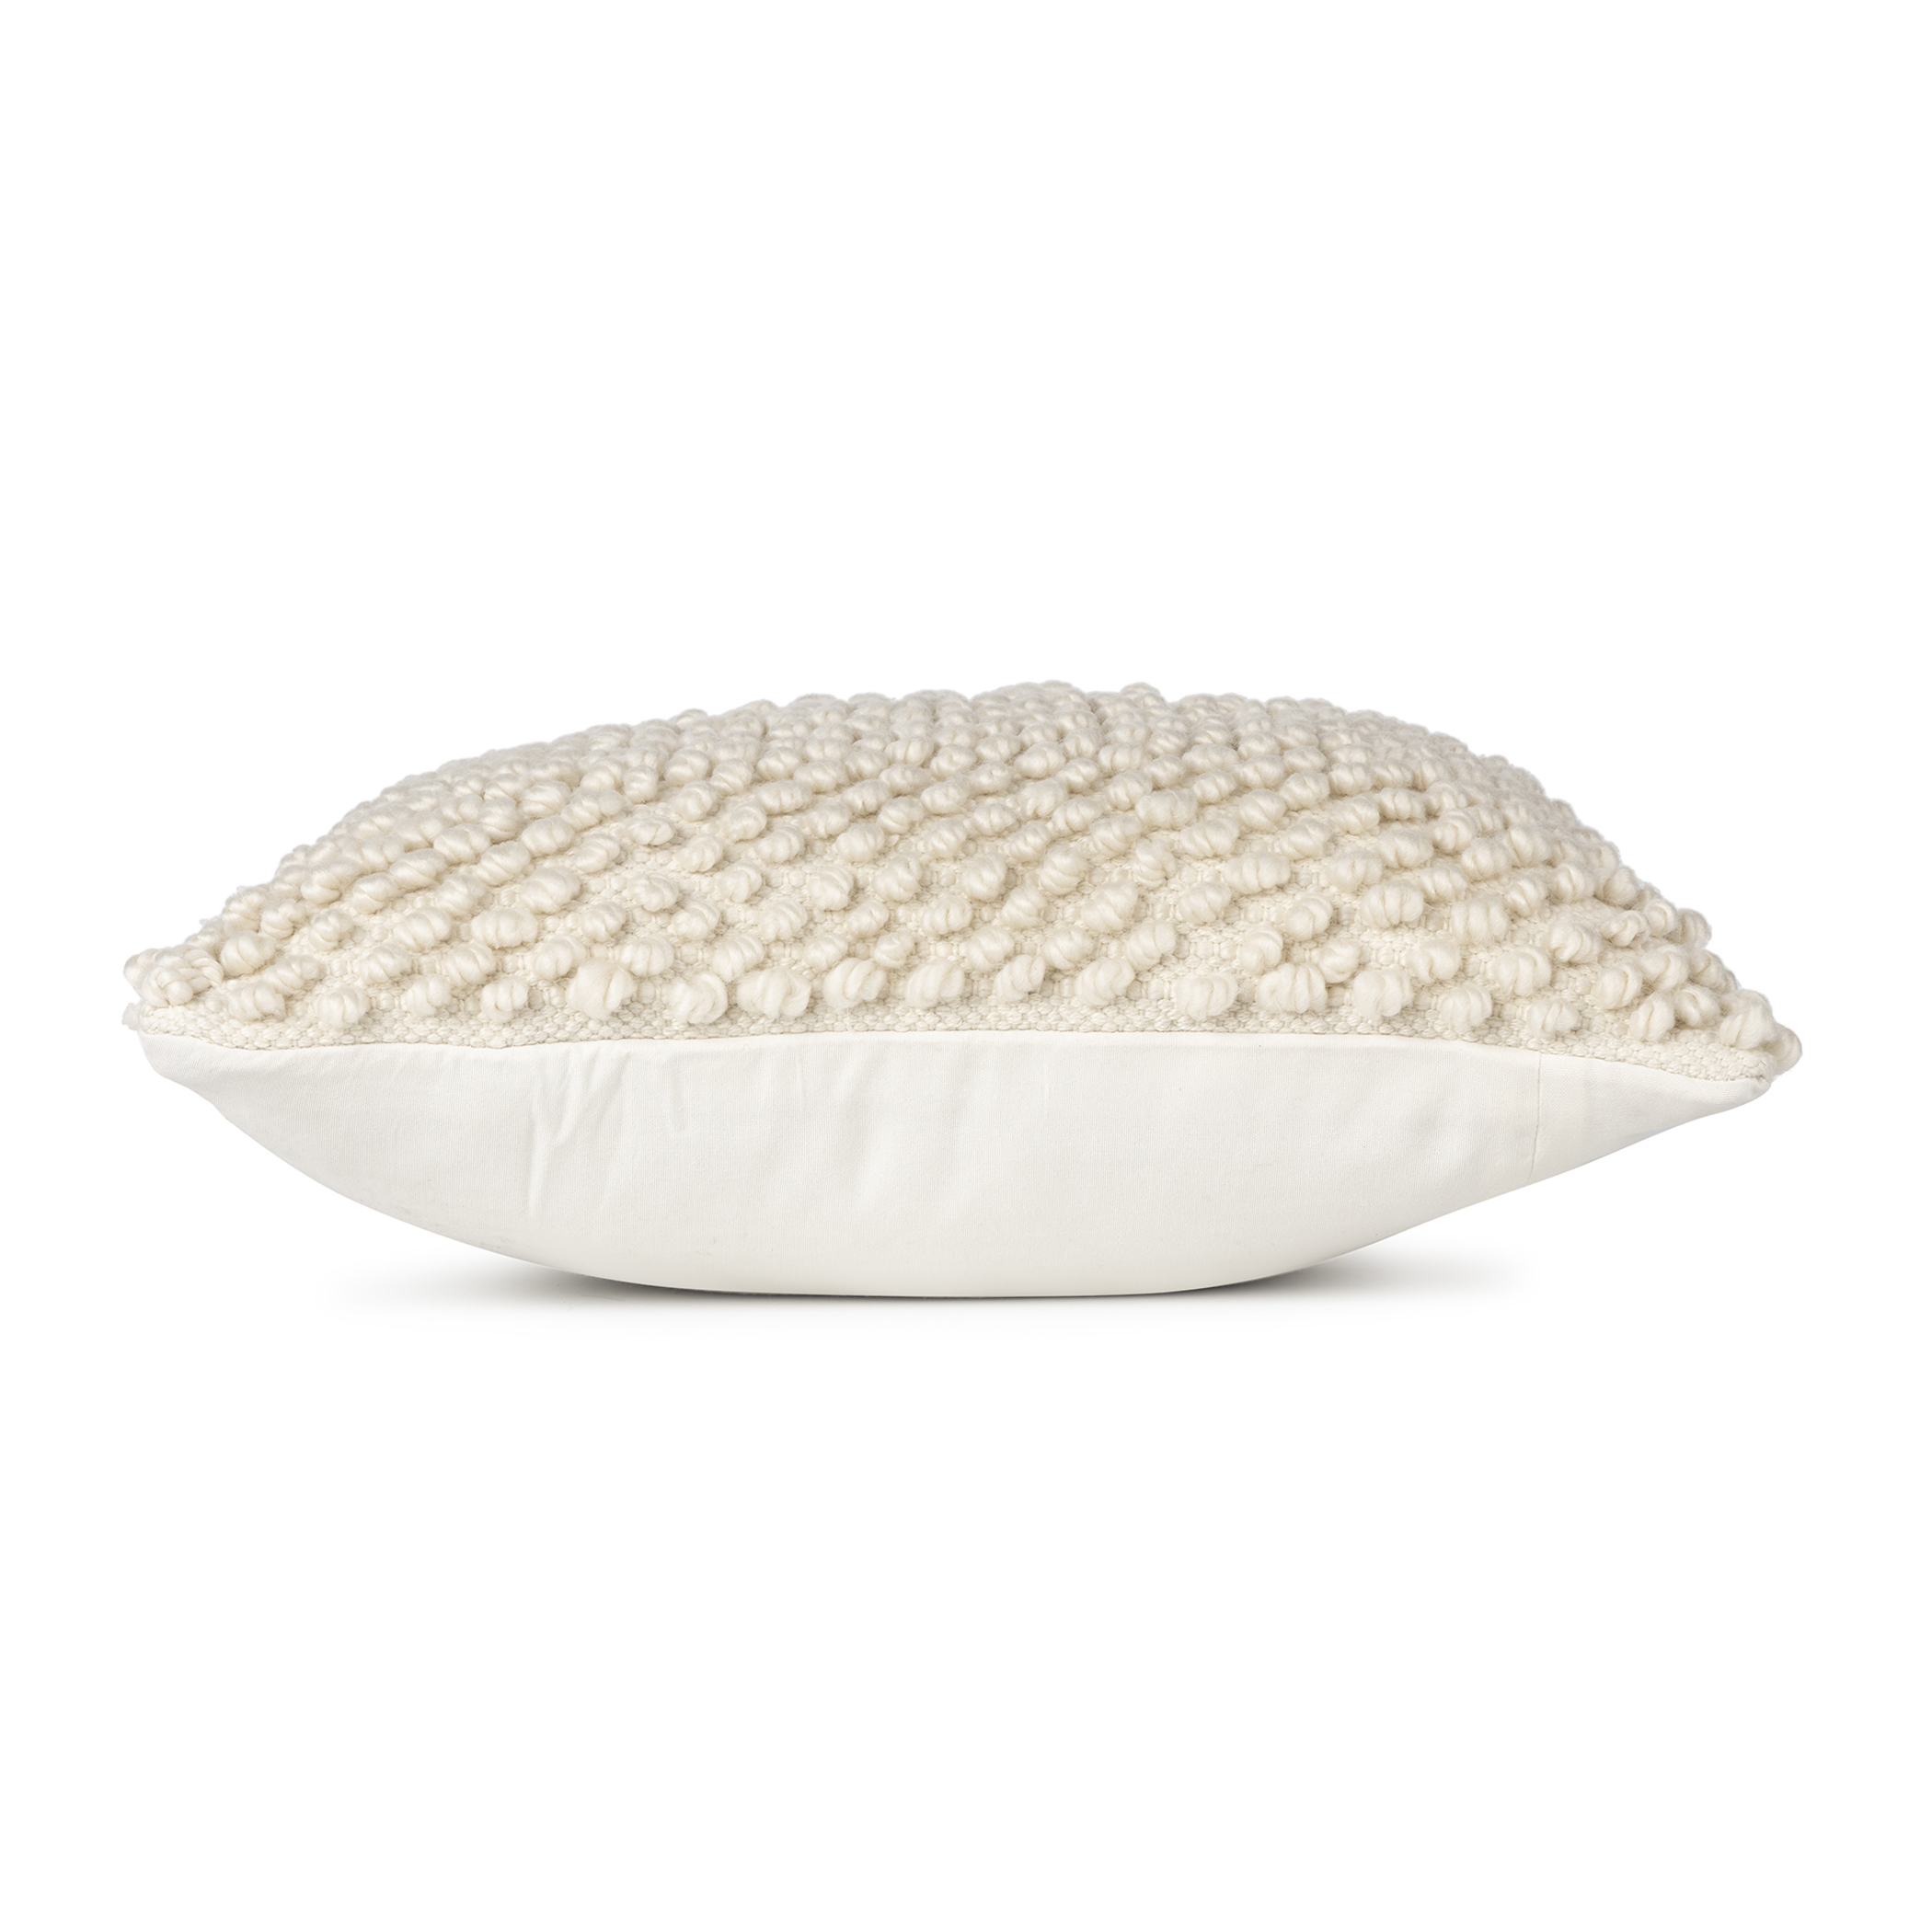 Better Homes & Gardens Knots Pillow, 21" x 21" inch Square, Off White - image 5 of 5